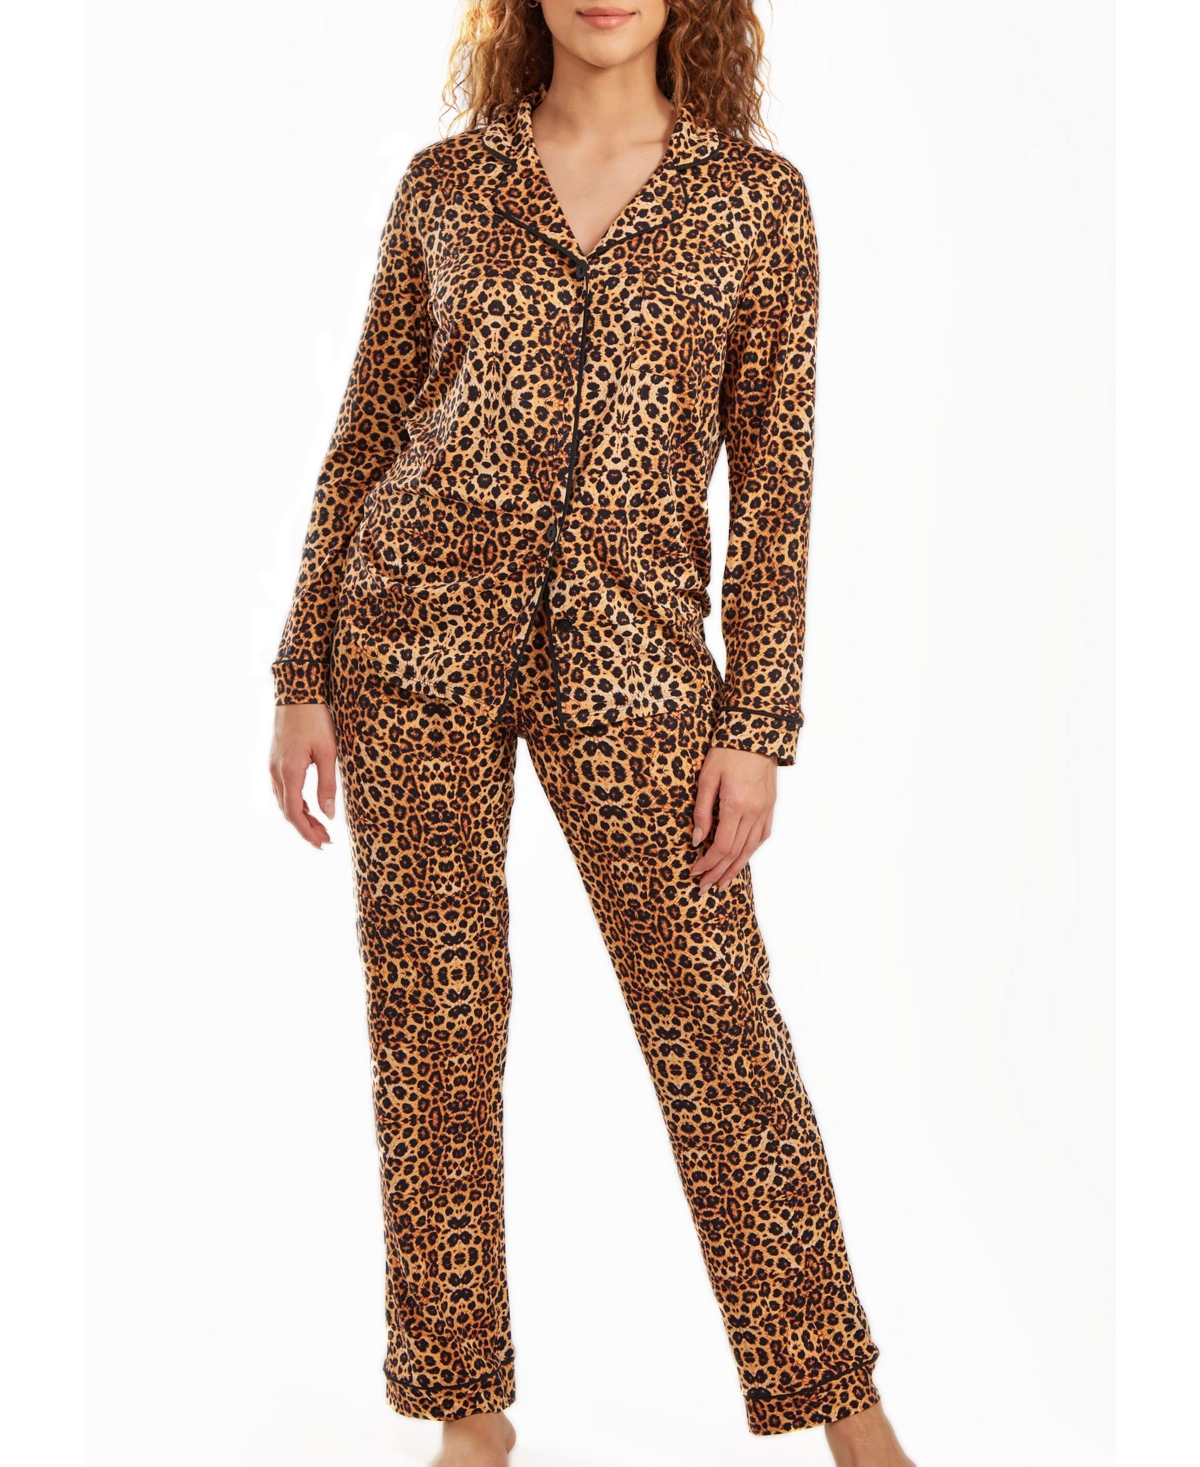 Icollection Women's Chiya Modal Leopard Pajama Pant Set With Button Down Collar, 2 Piece